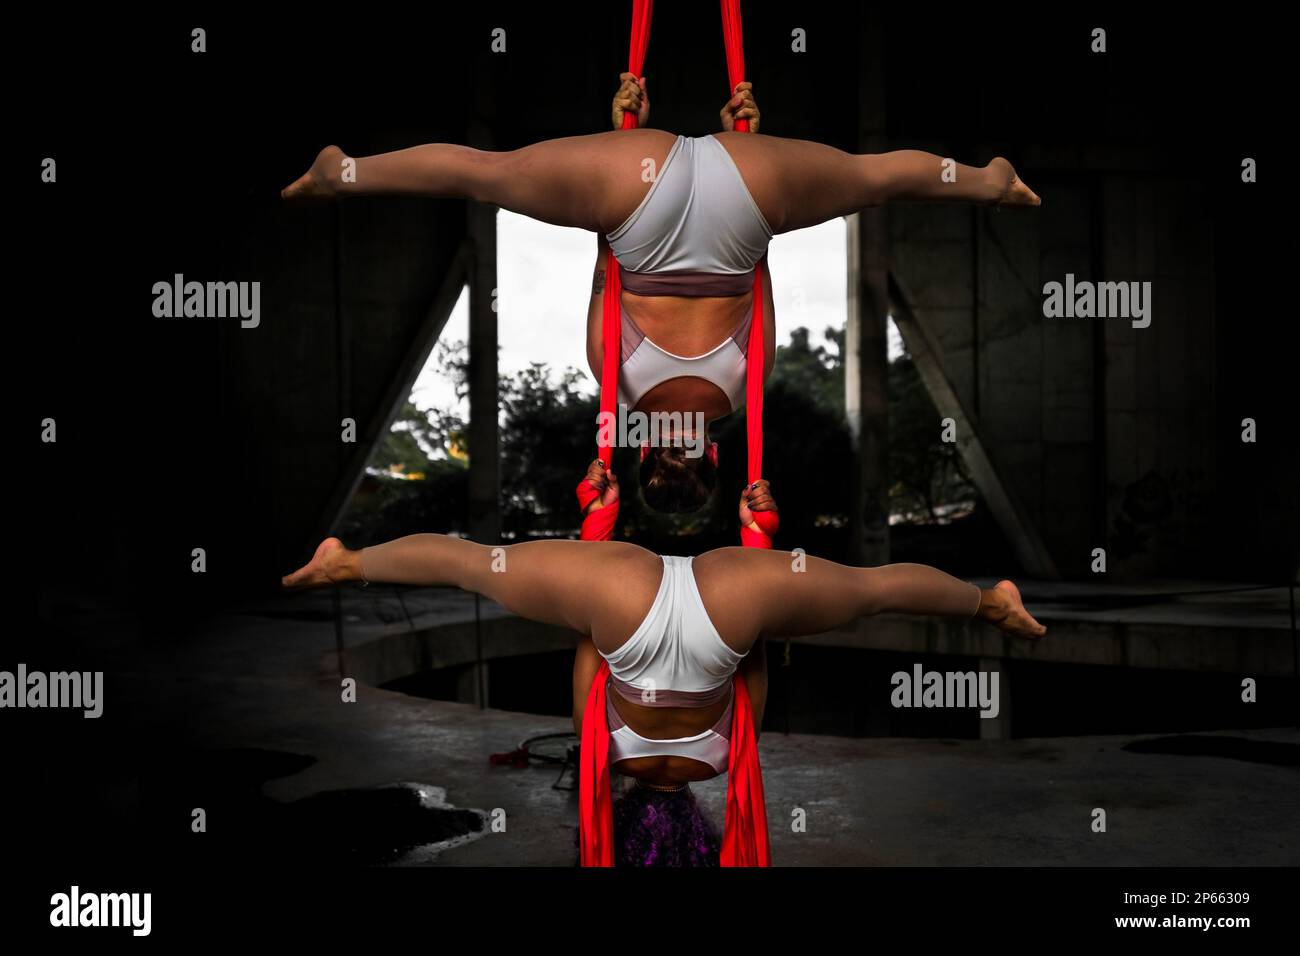 Shara Guzman and Mariale Contreras, Venezuelan aerial dancers, perform a duo act on aerial silks during an art performance in Barranquilla, Colombia. Stock Photo